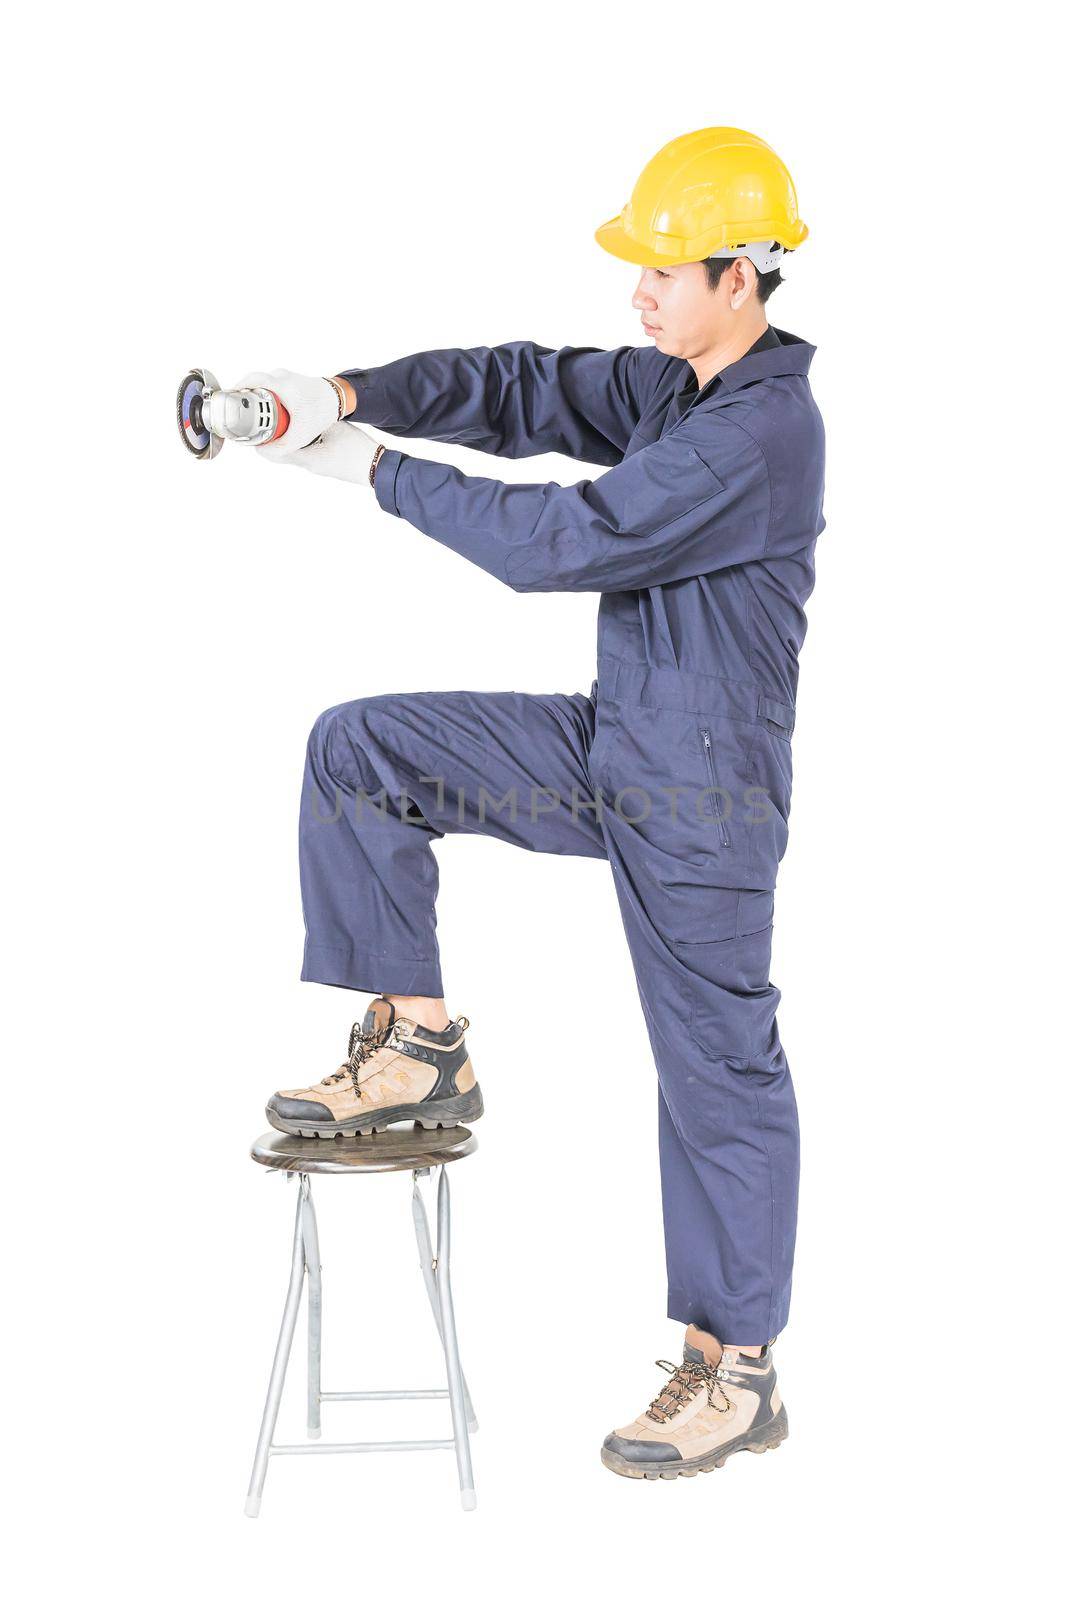 Young handyman in uniform hold grinder, Cutout isolated on white background